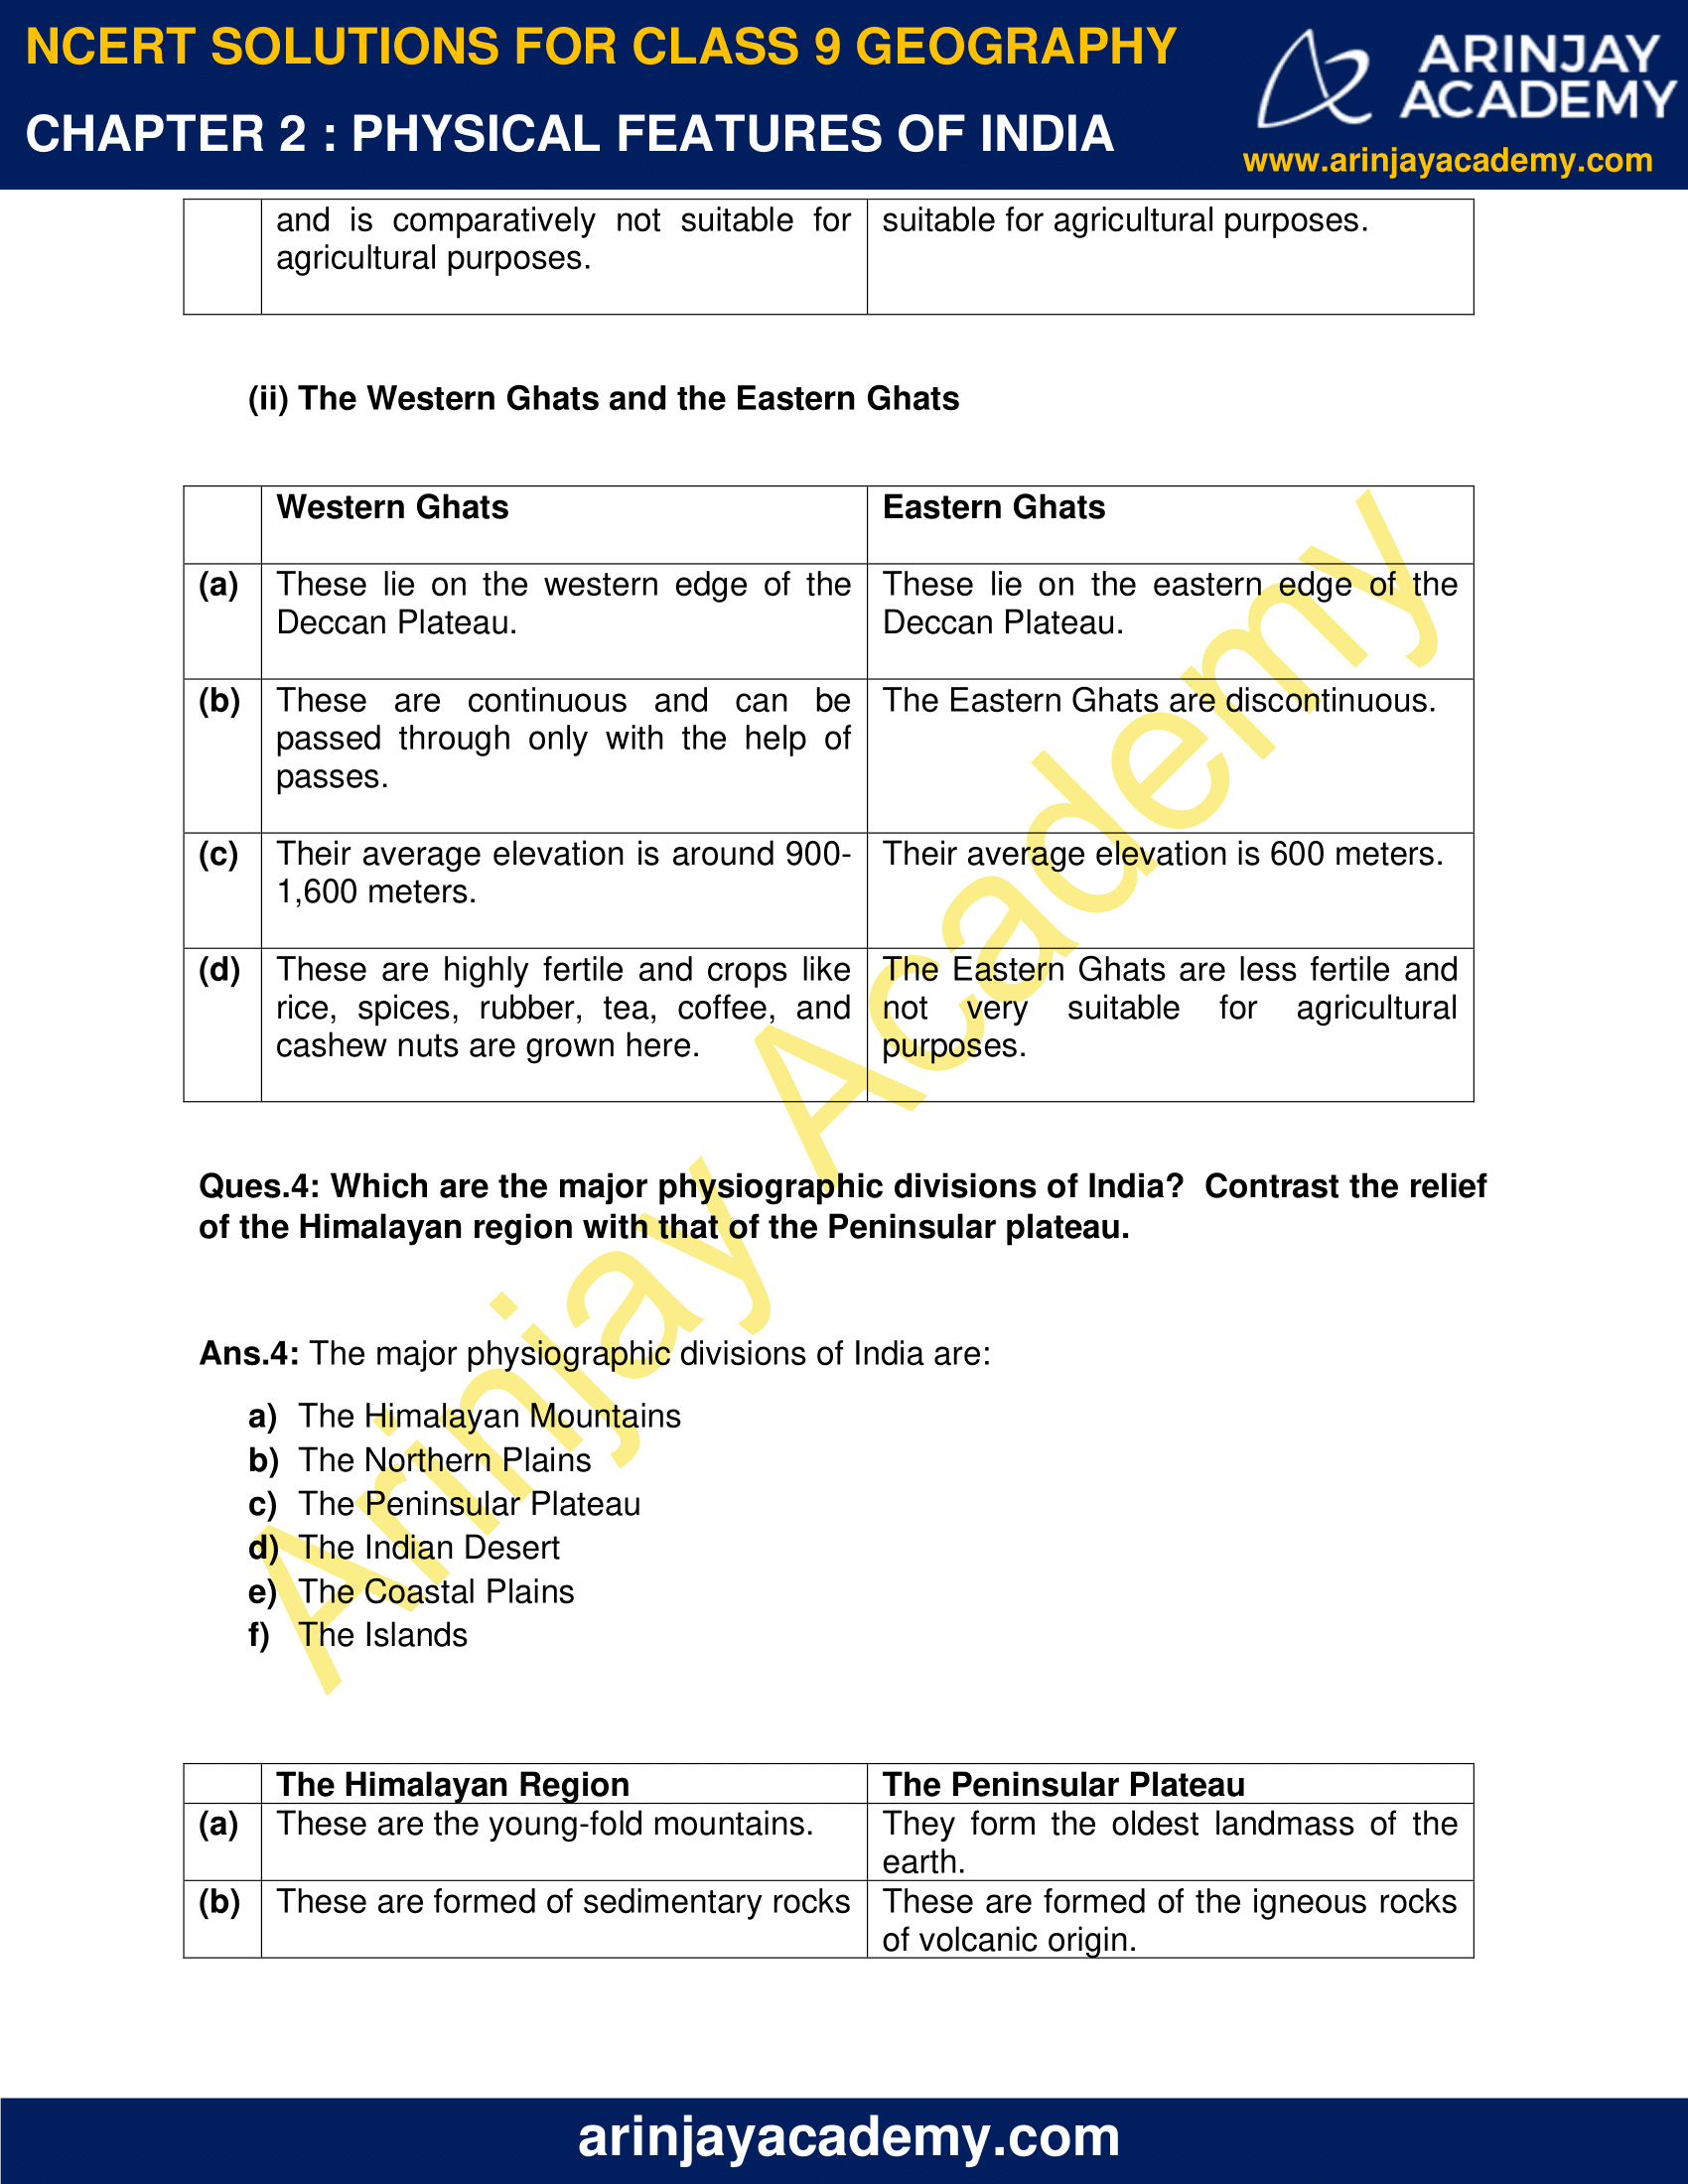 case study questions class 9 geography ch 2